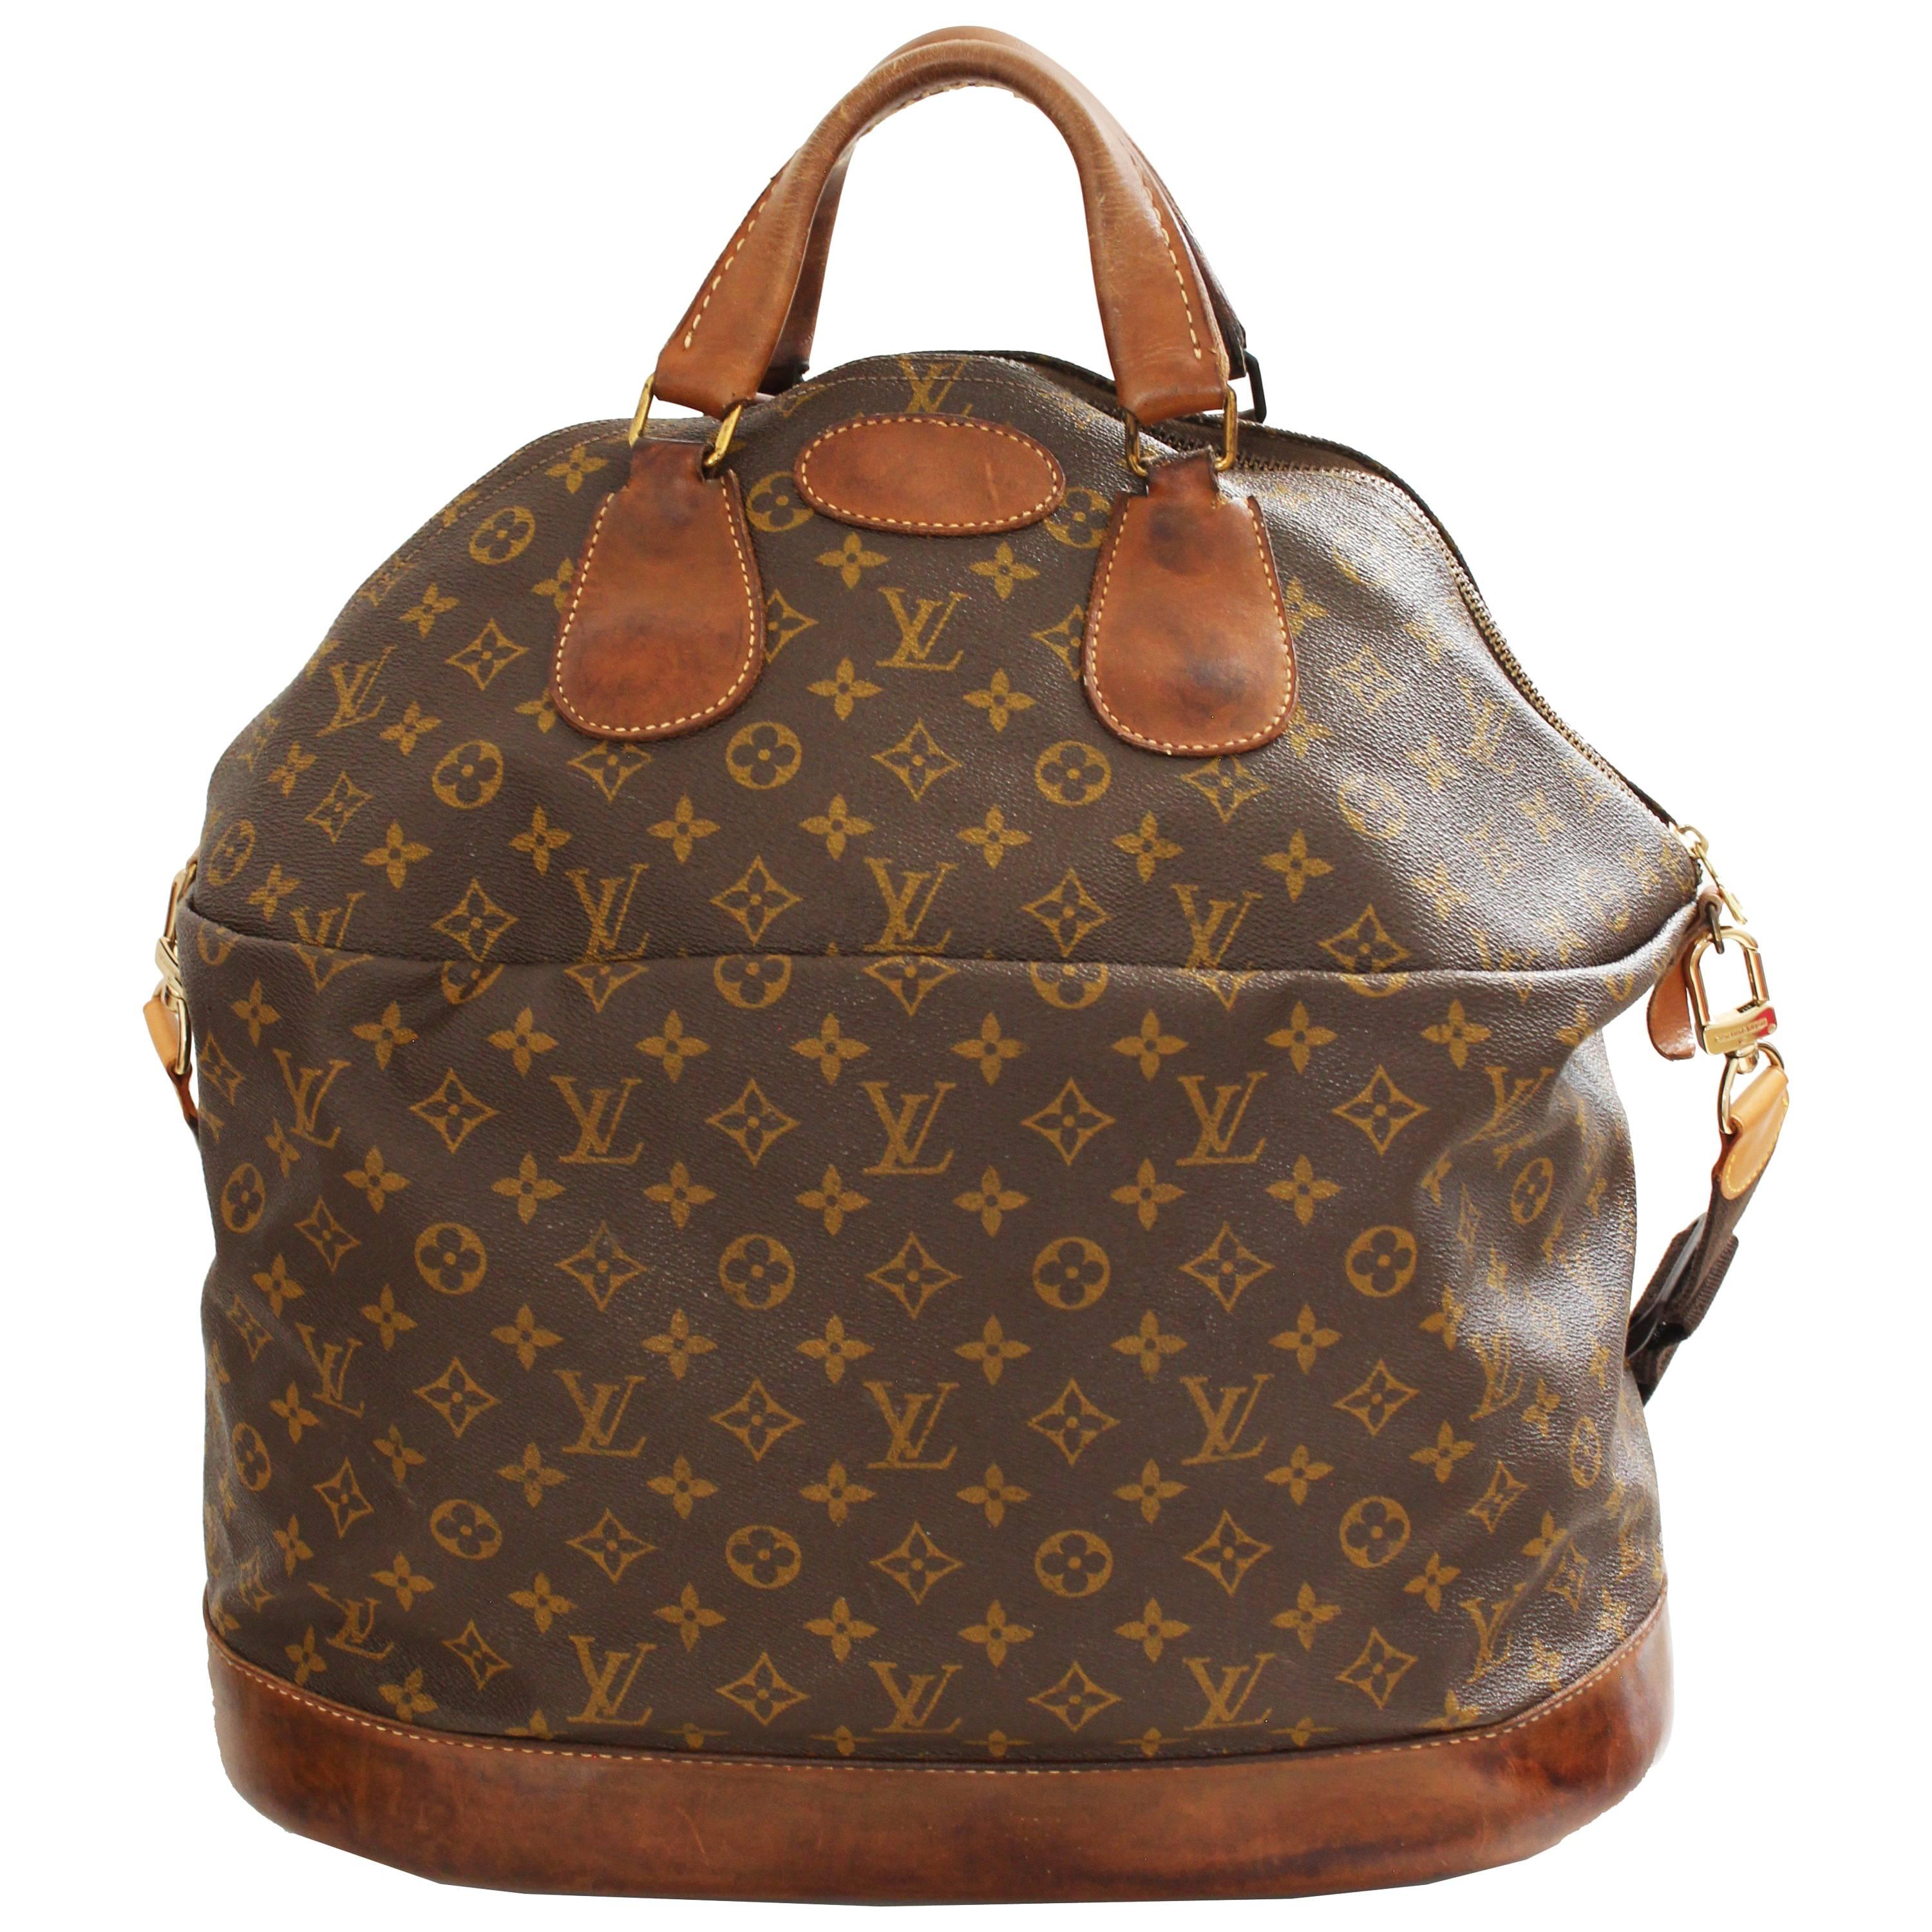 Louis Vuitton Large Steamer Bag Keepall Monogram Travel Tote French Company 70er Jahre